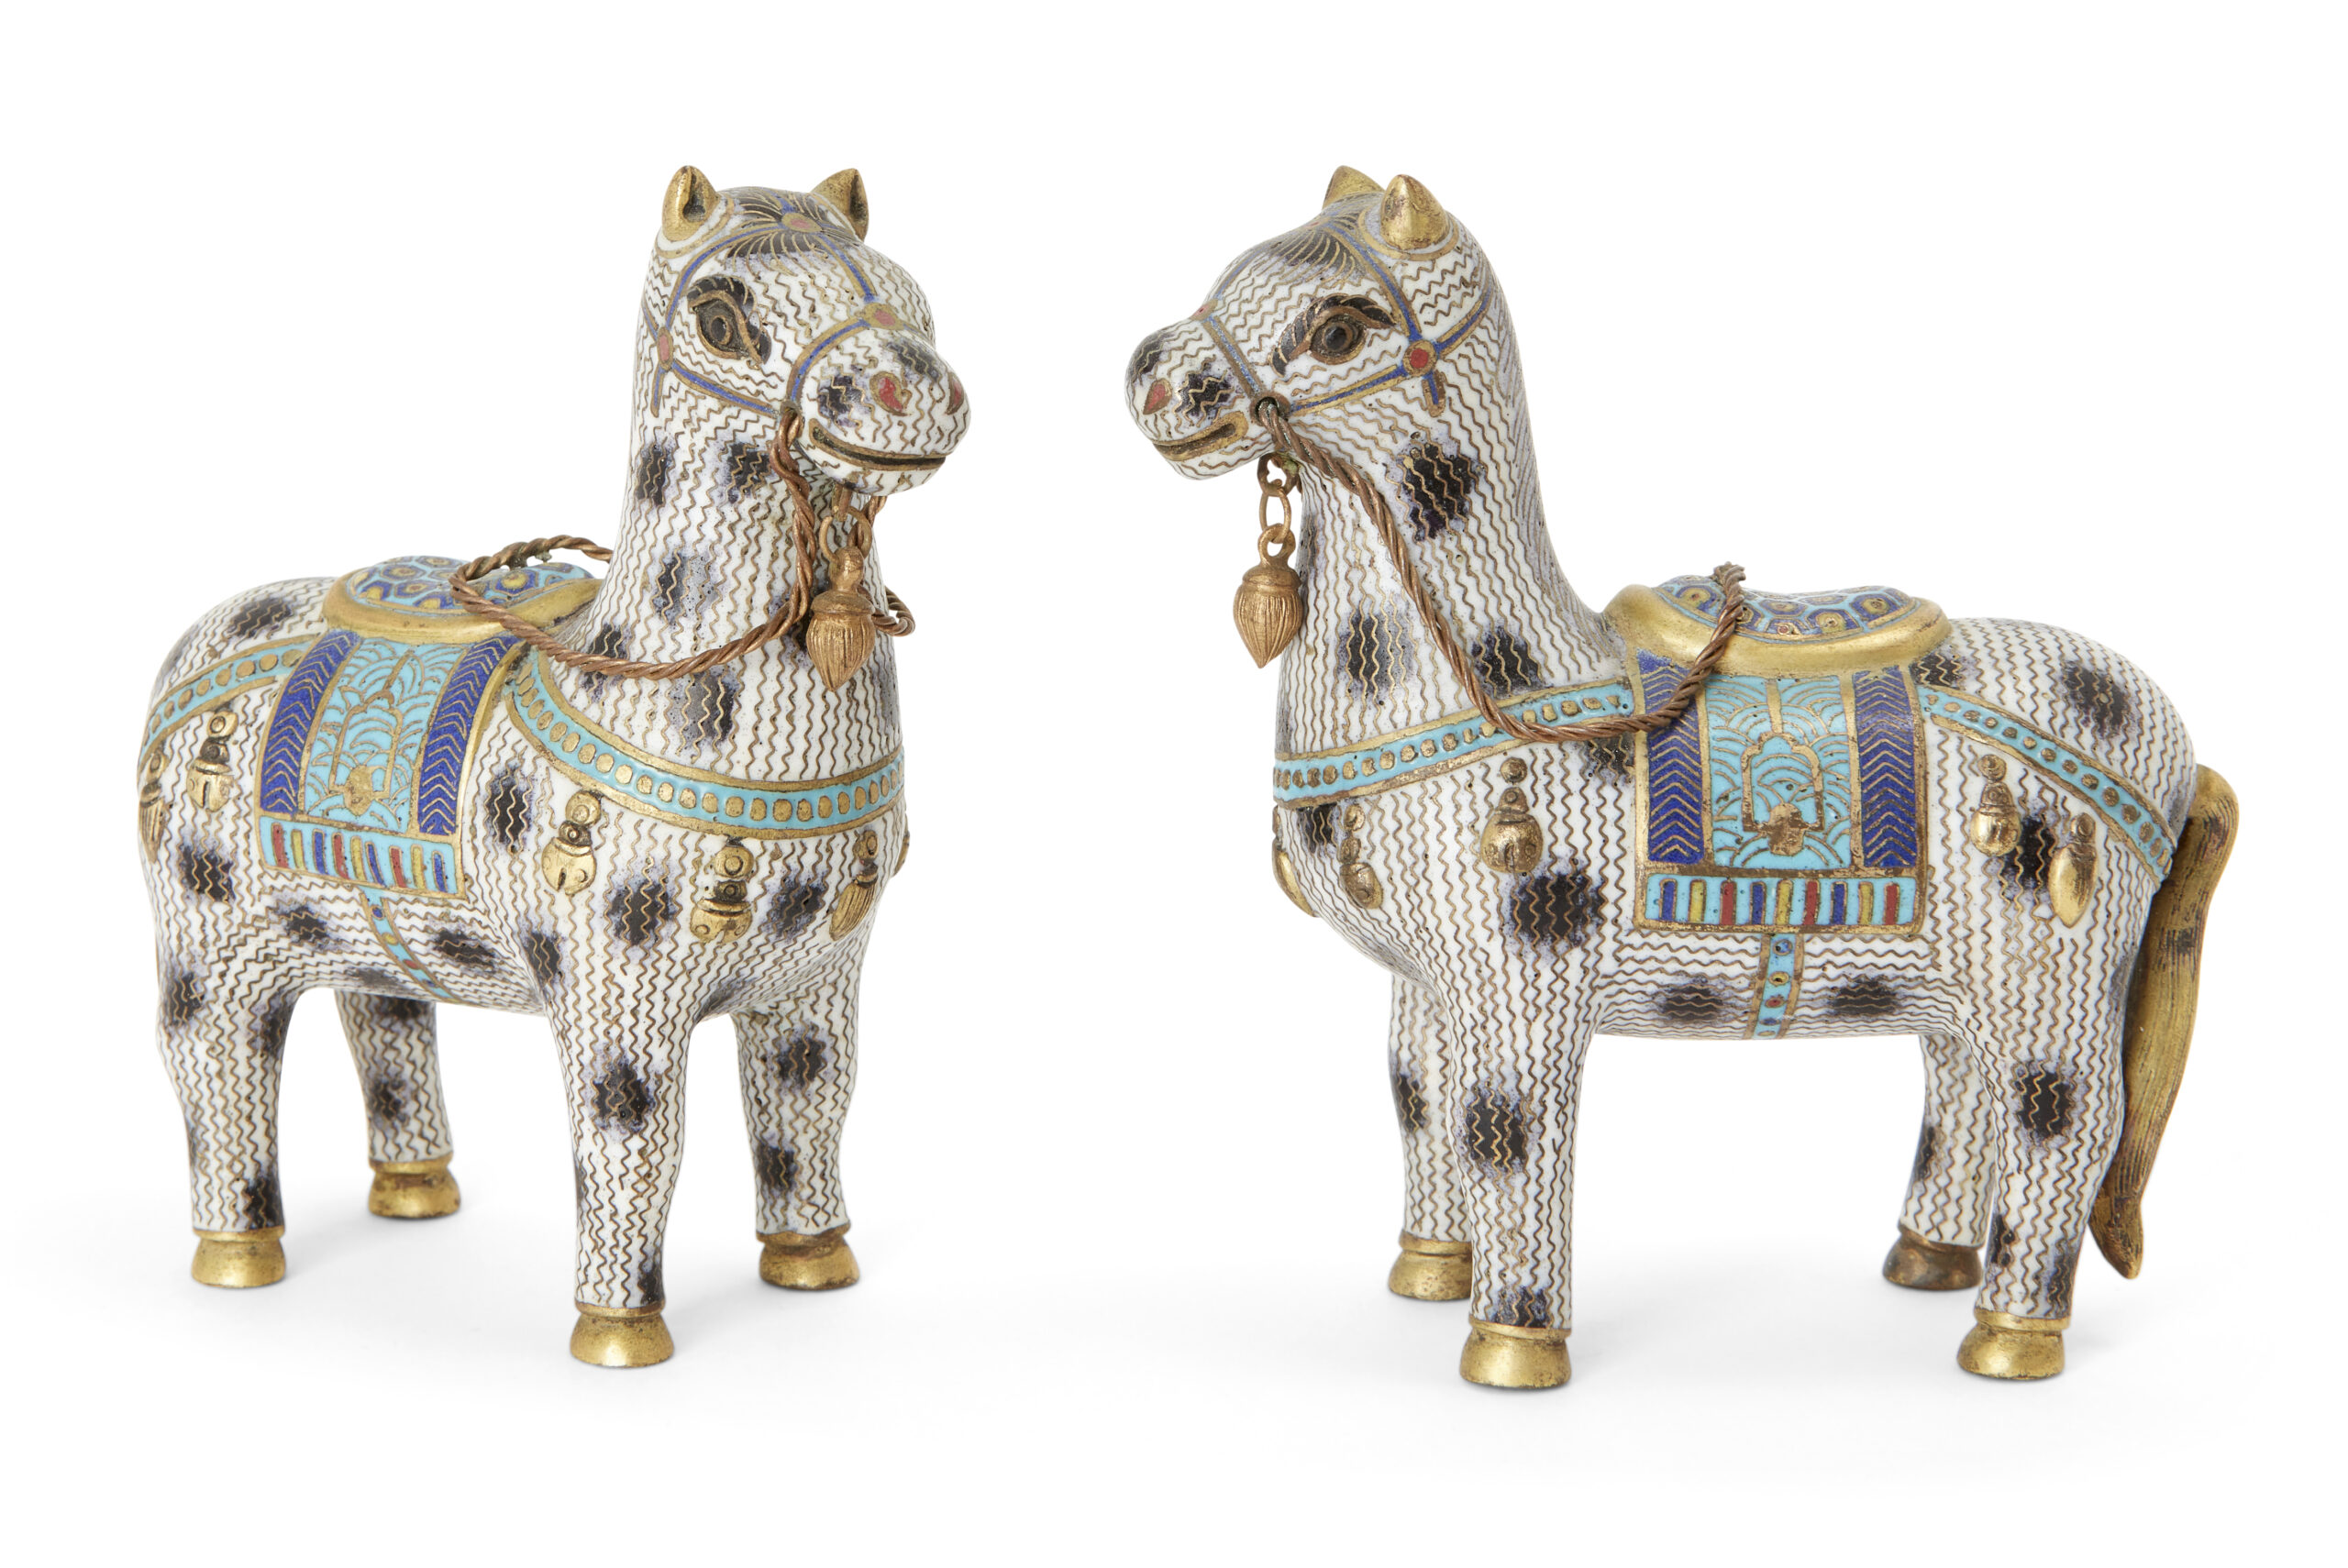 A pair of Chinese champlevé and cloisonné-enamel horses, 18th century